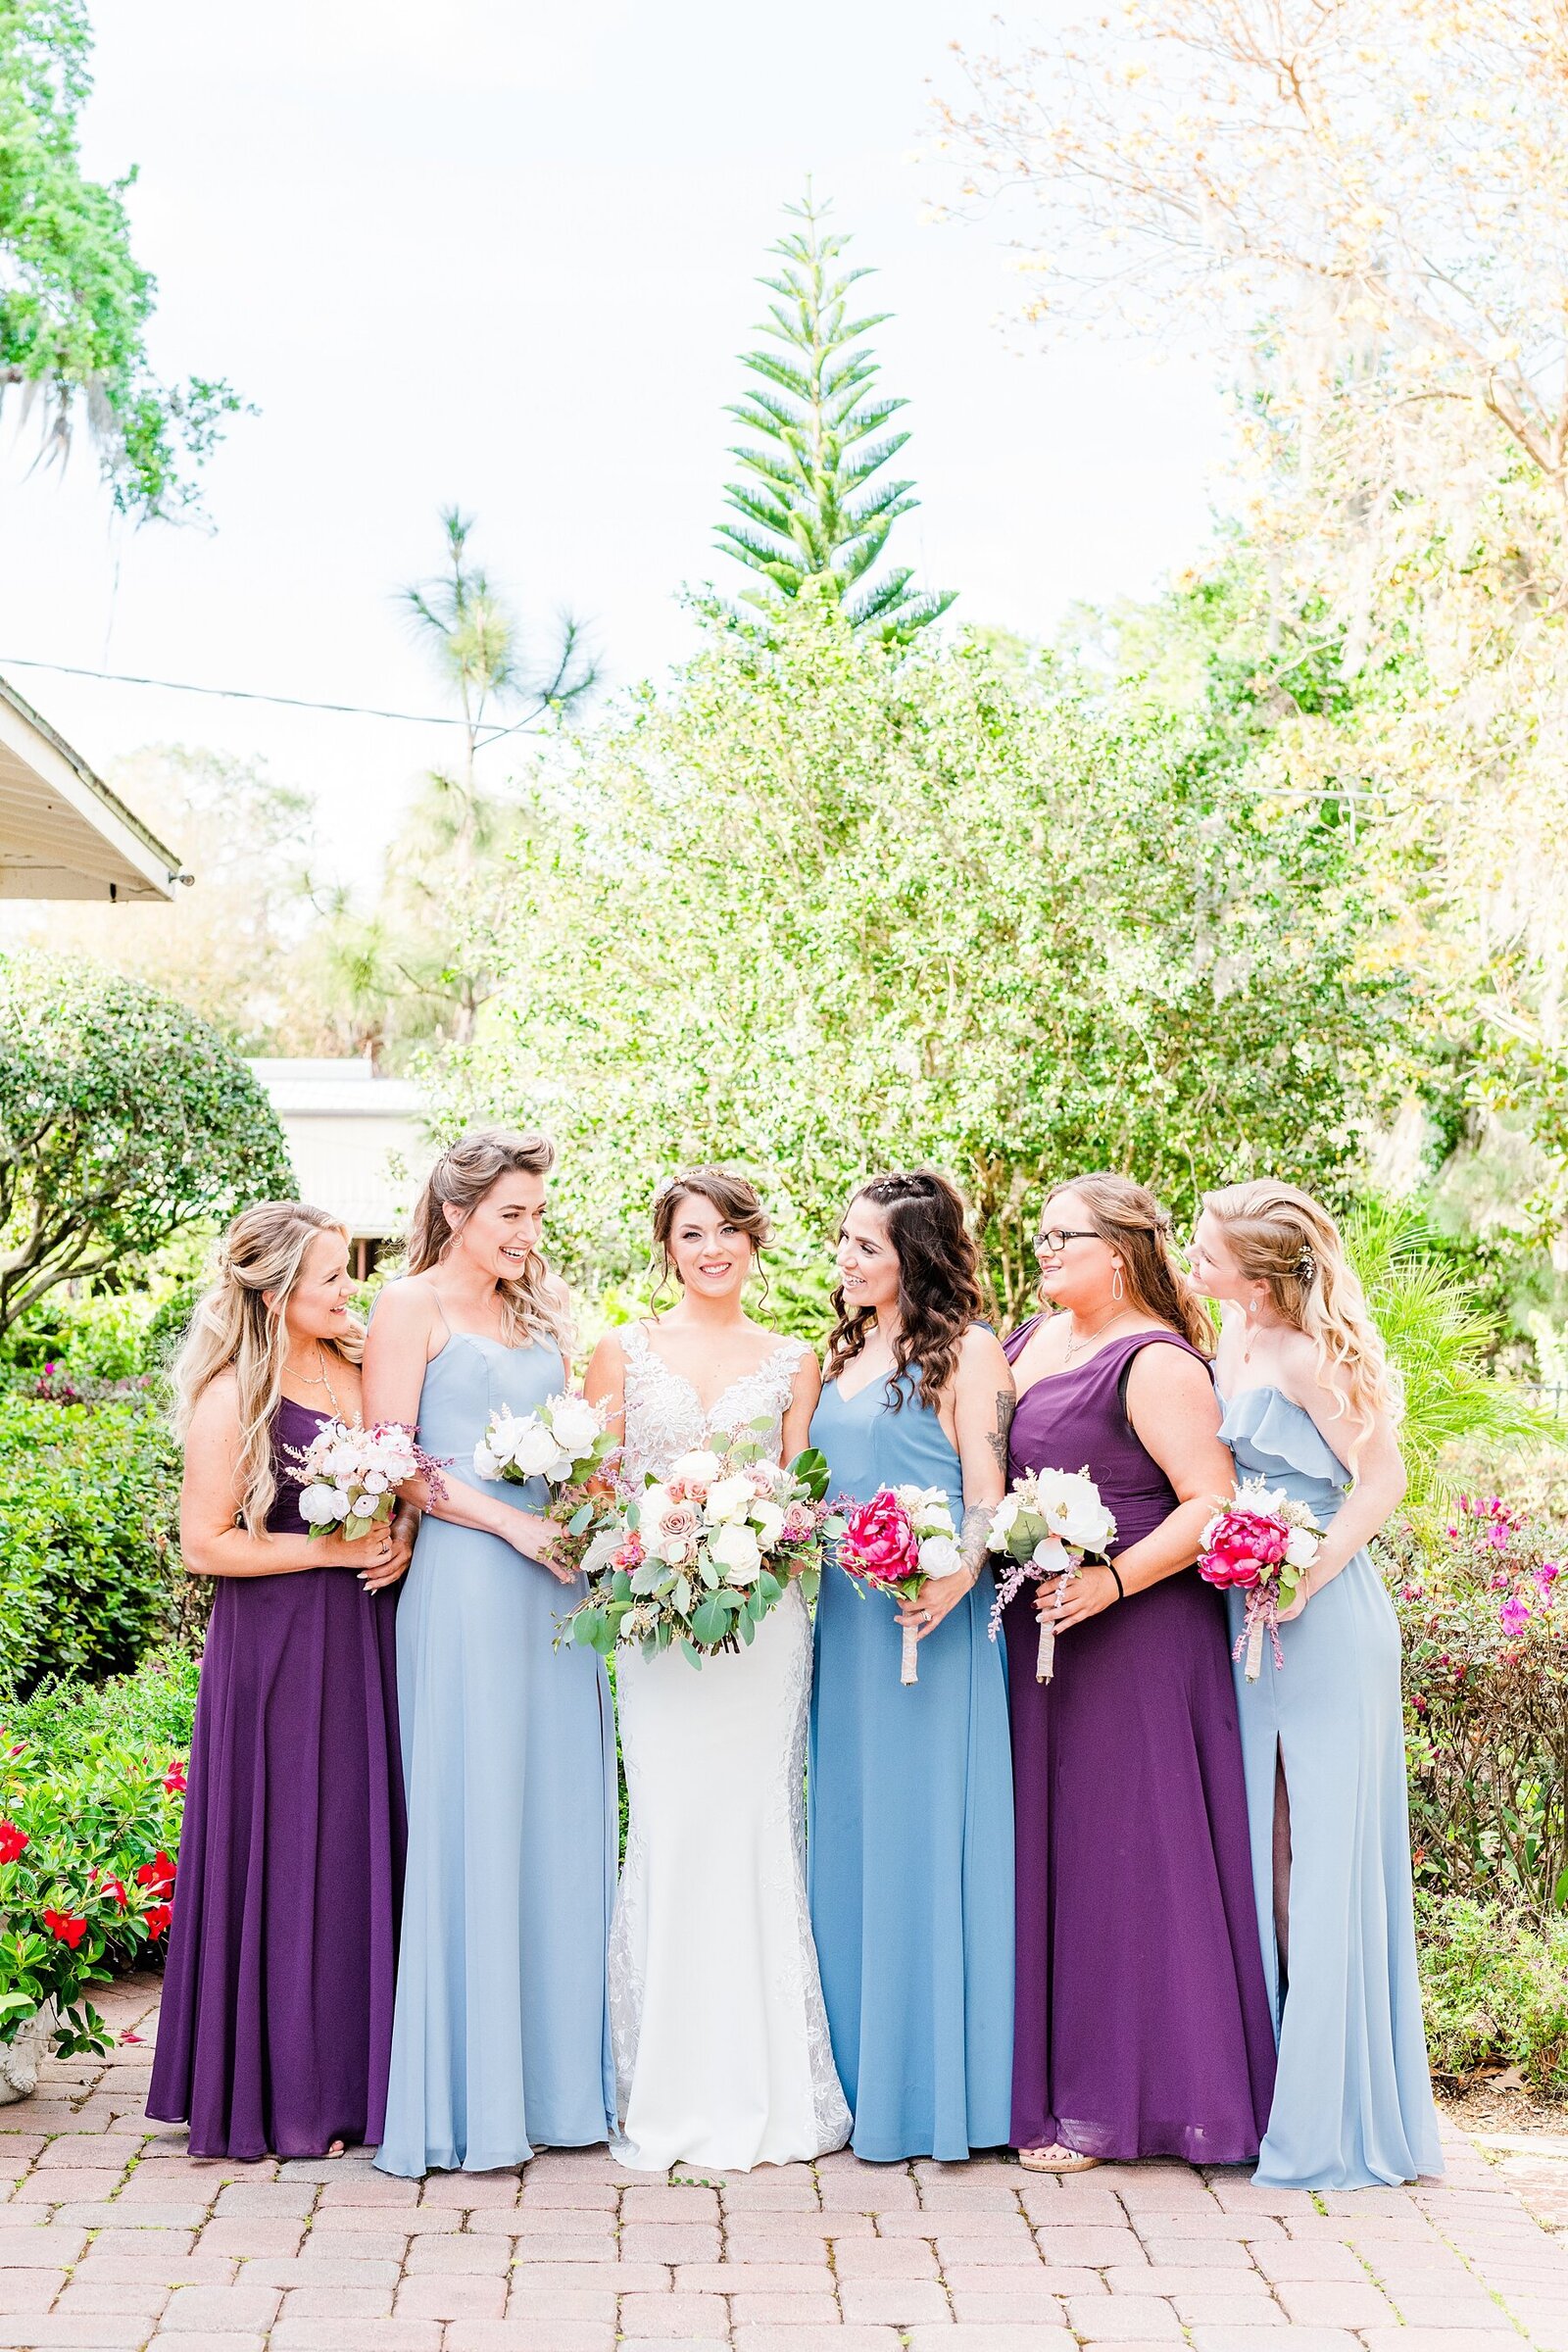 Blue Bridesmaid dresses | Town Manor | Chynna Pacheco Photography